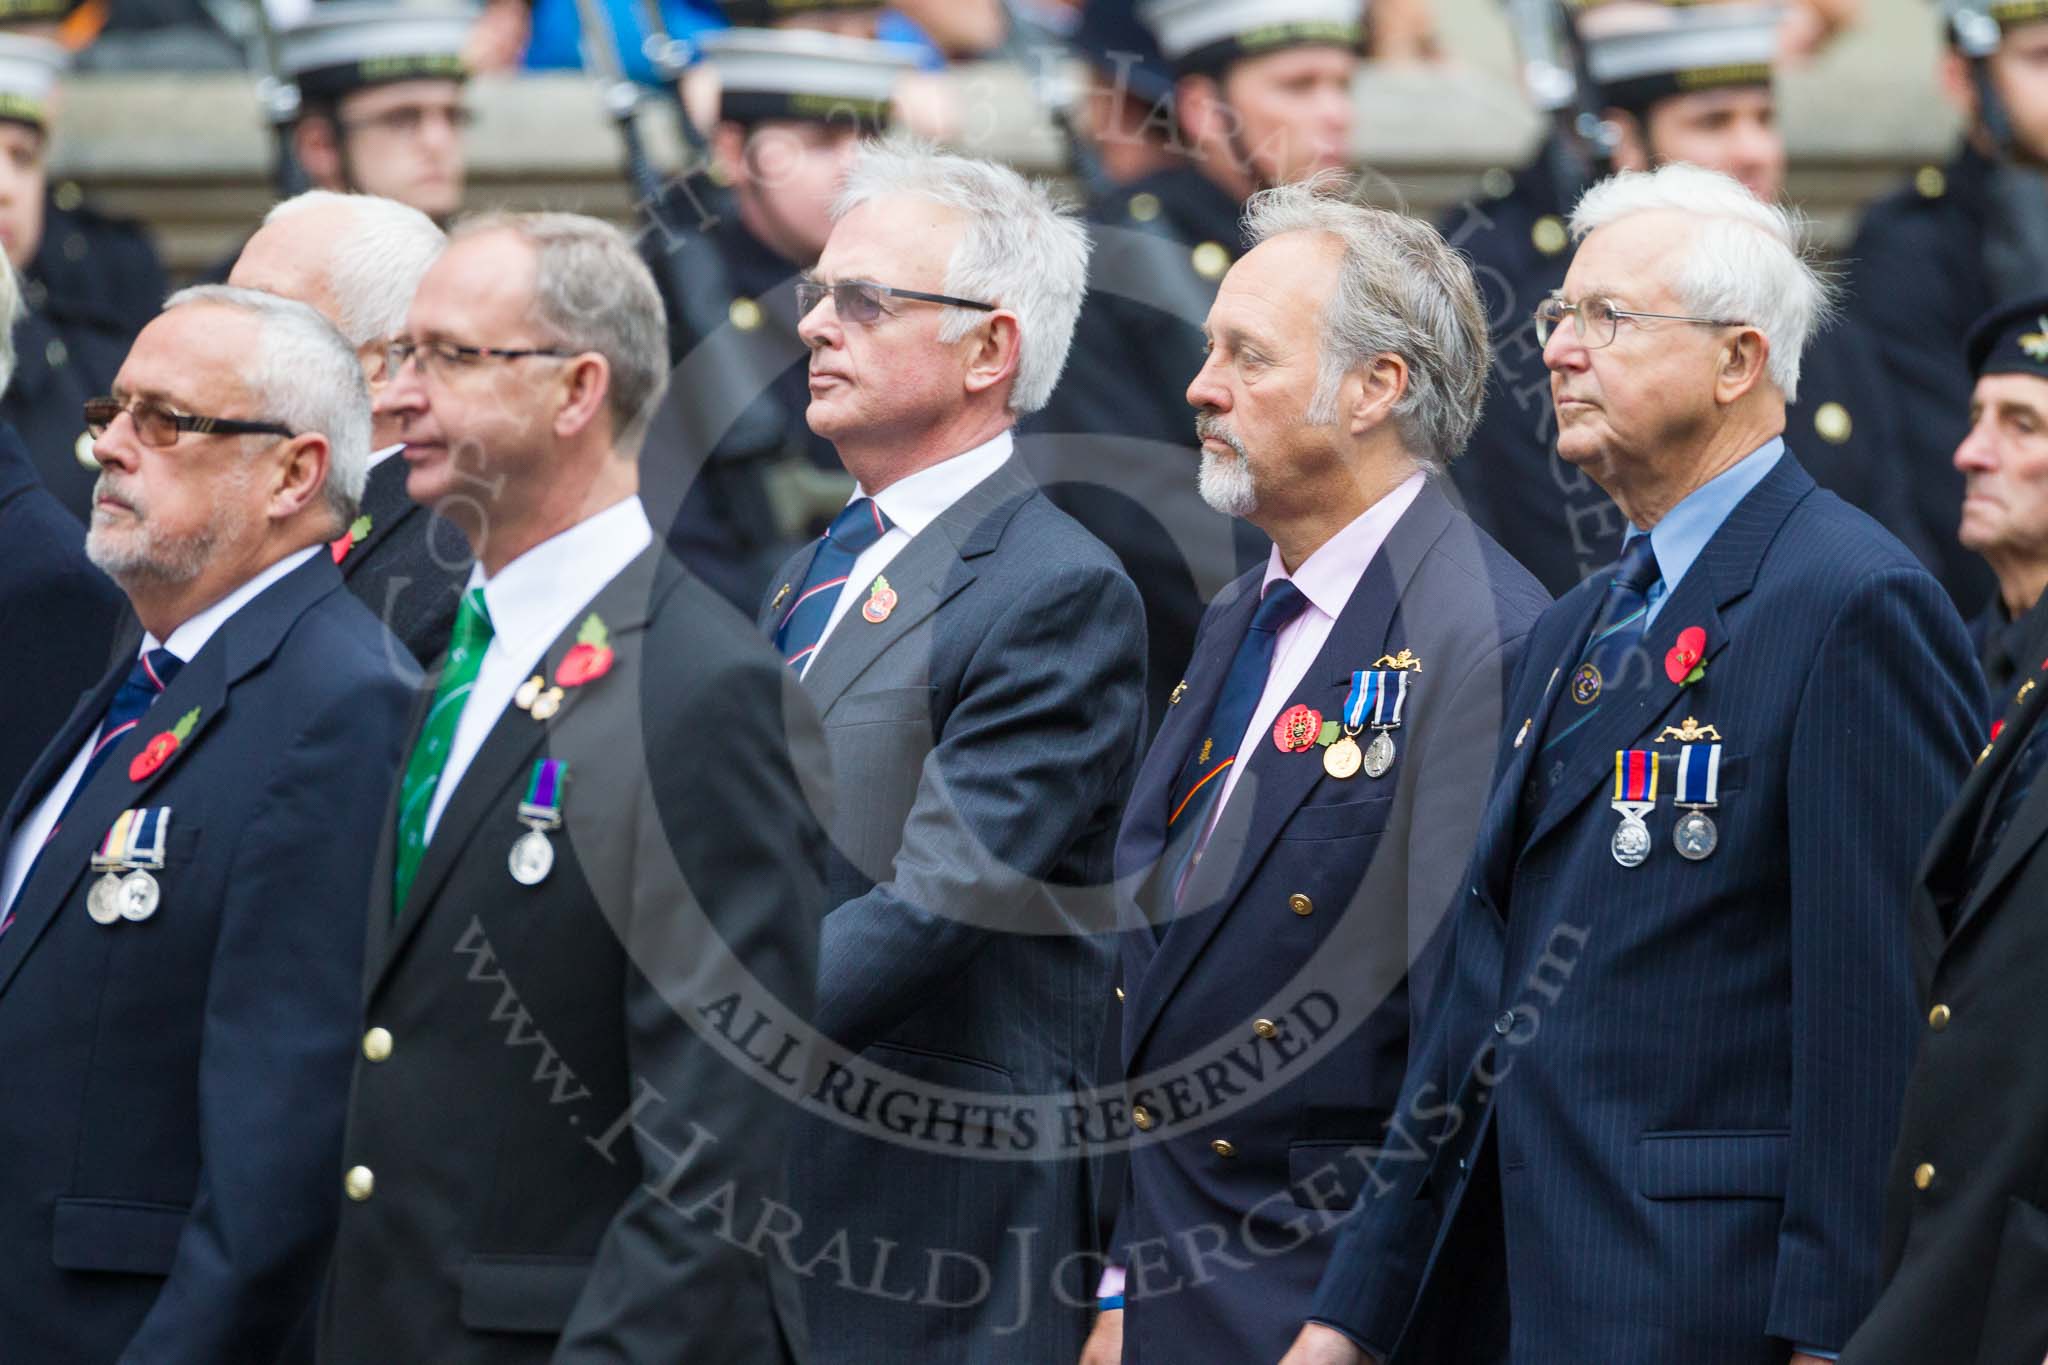 Remembrance Sunday at the Cenotaph 2015: Group E31, The Fisgard Association.
Cenotaph, Whitehall, London SW1,
London,
Greater London,
United Kingdom,
on 08 November 2015 at 12:03, image #971